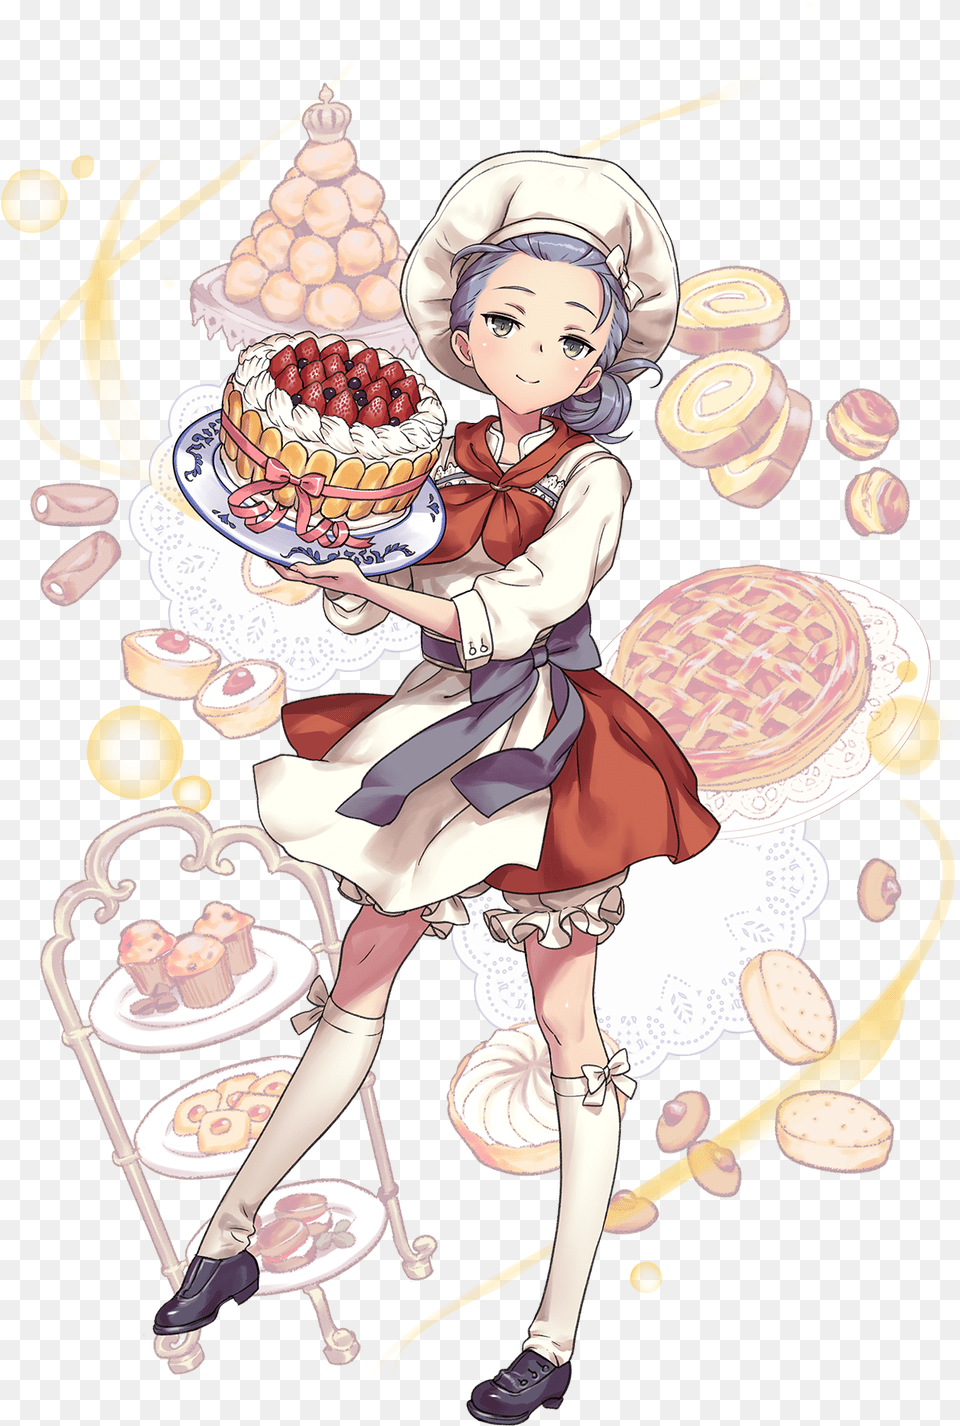 Anime Chefs Girl Transparent Cartoons Anime Girl Anime Chef, Book, Comics, Publication, Food Free Png Download